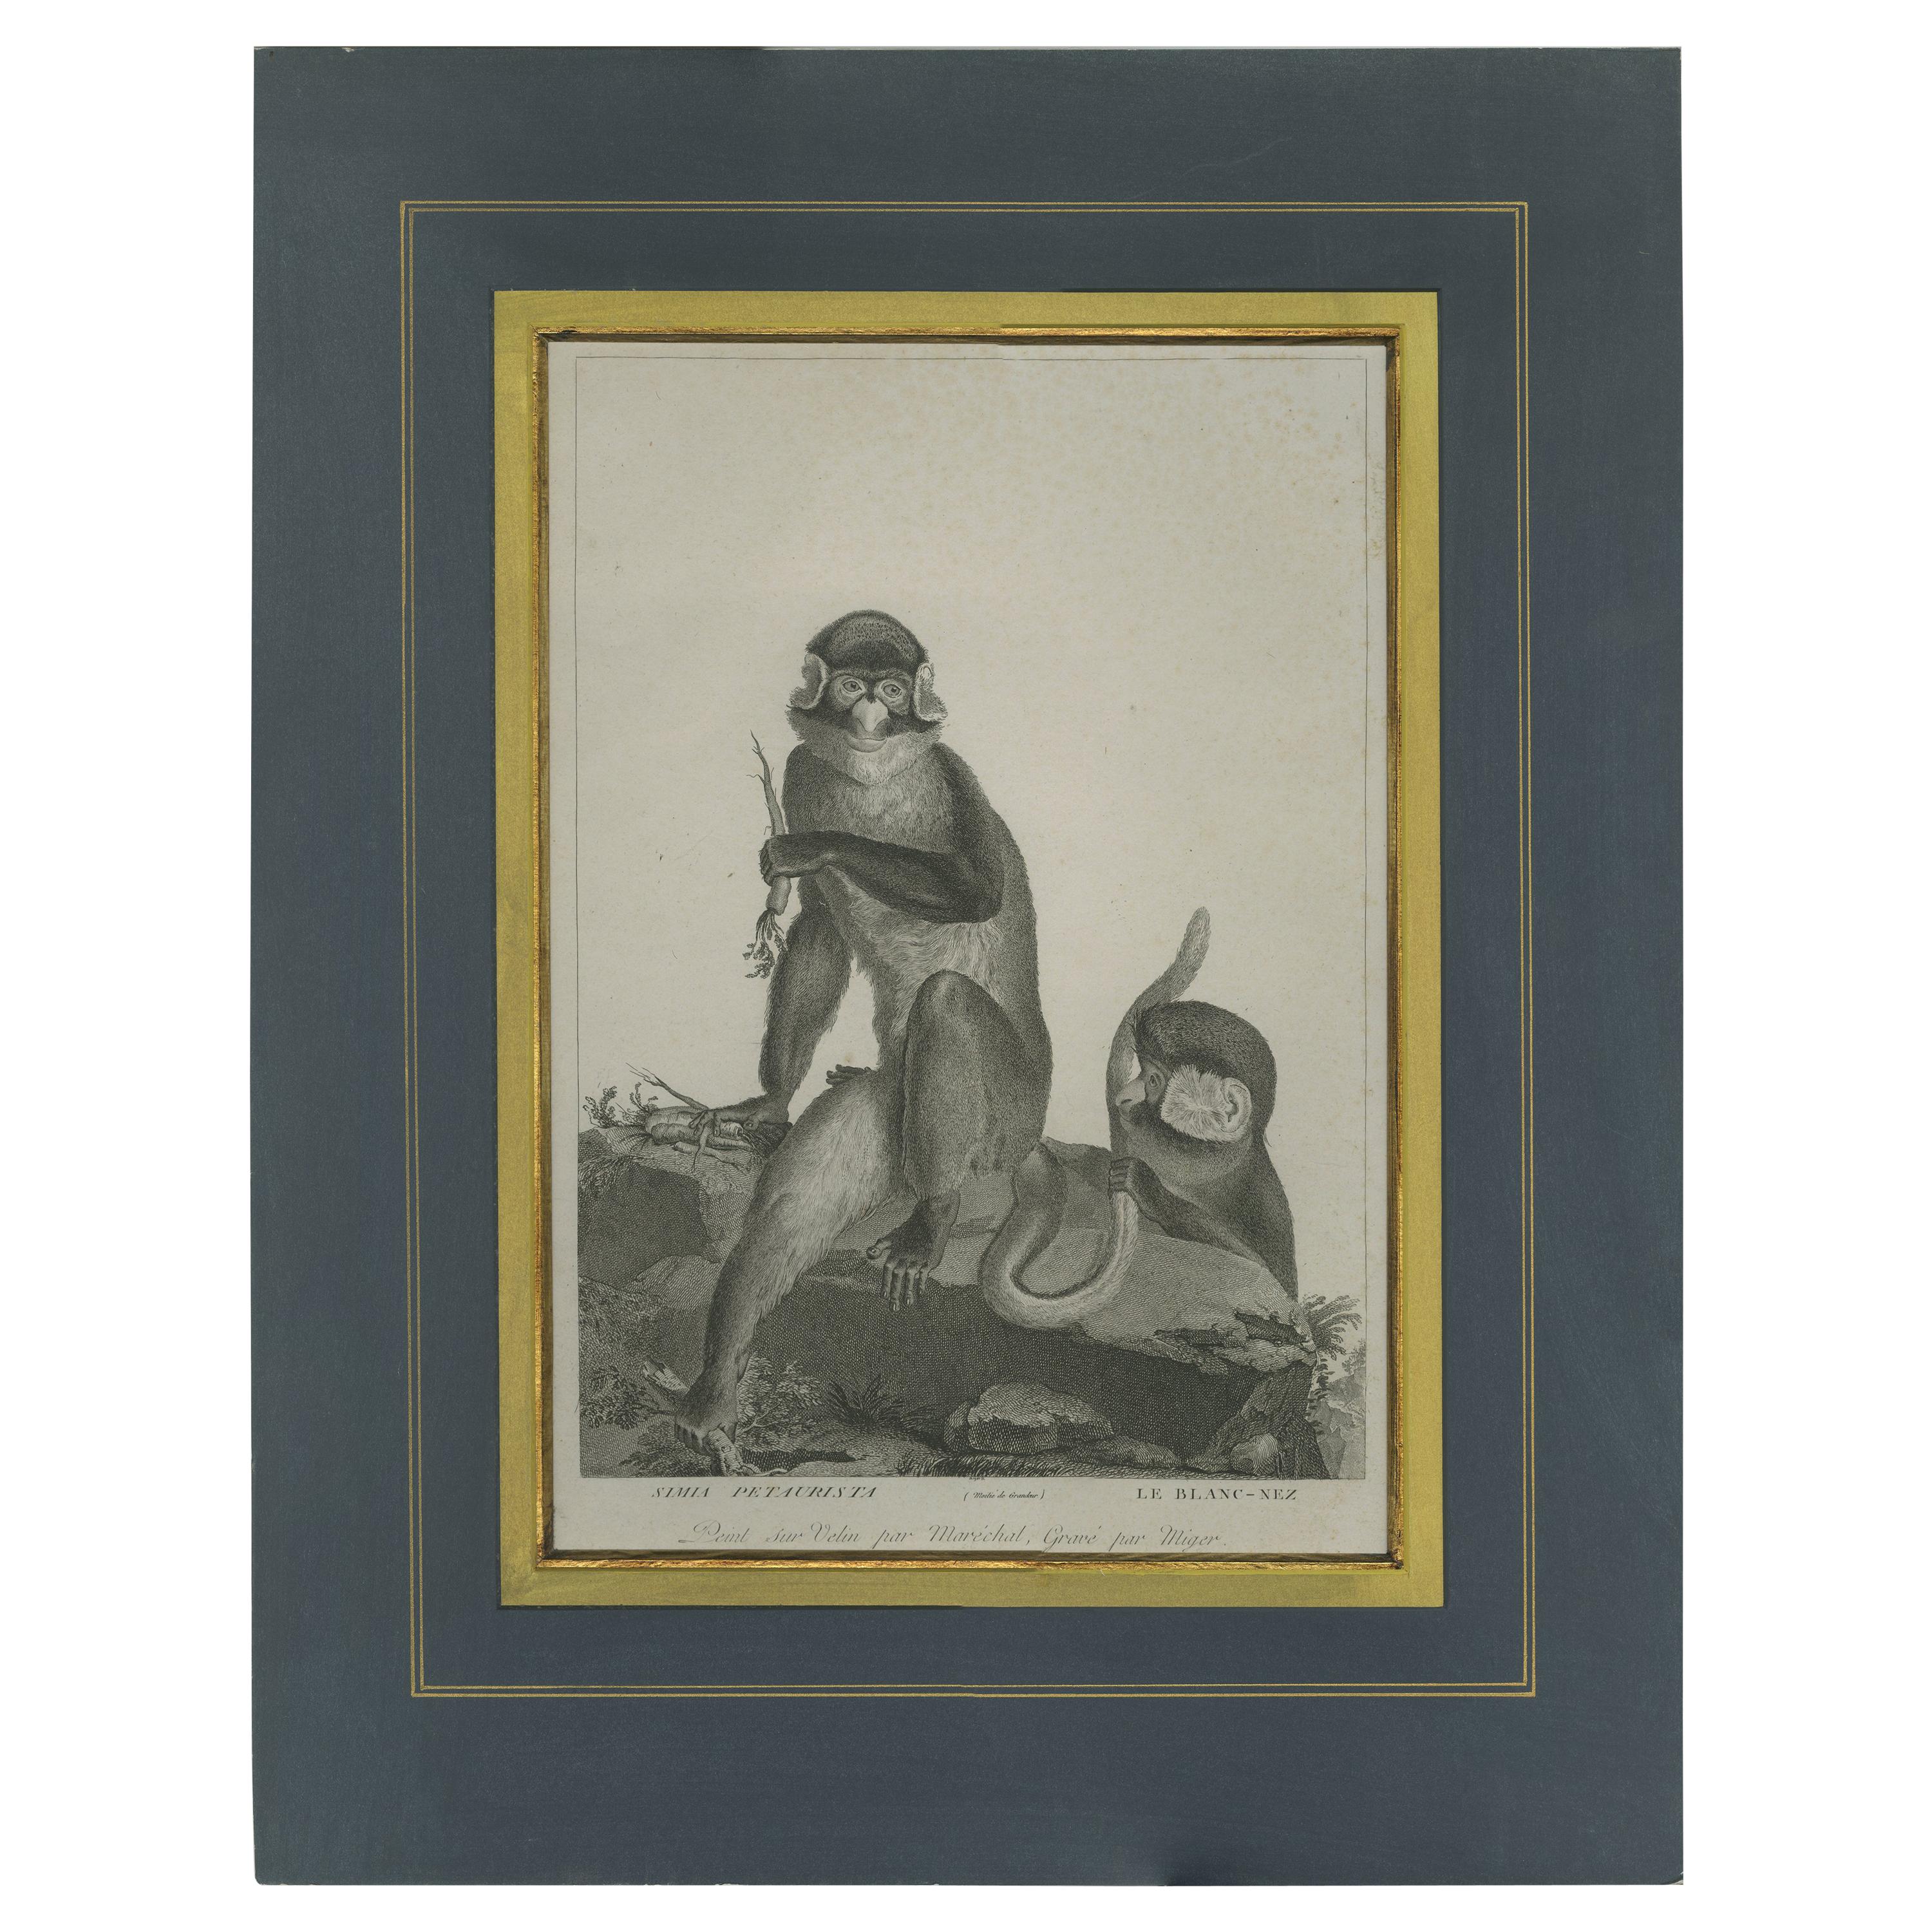 Antique Print of the White-Nosed Monkey by Miger 'c.1808'